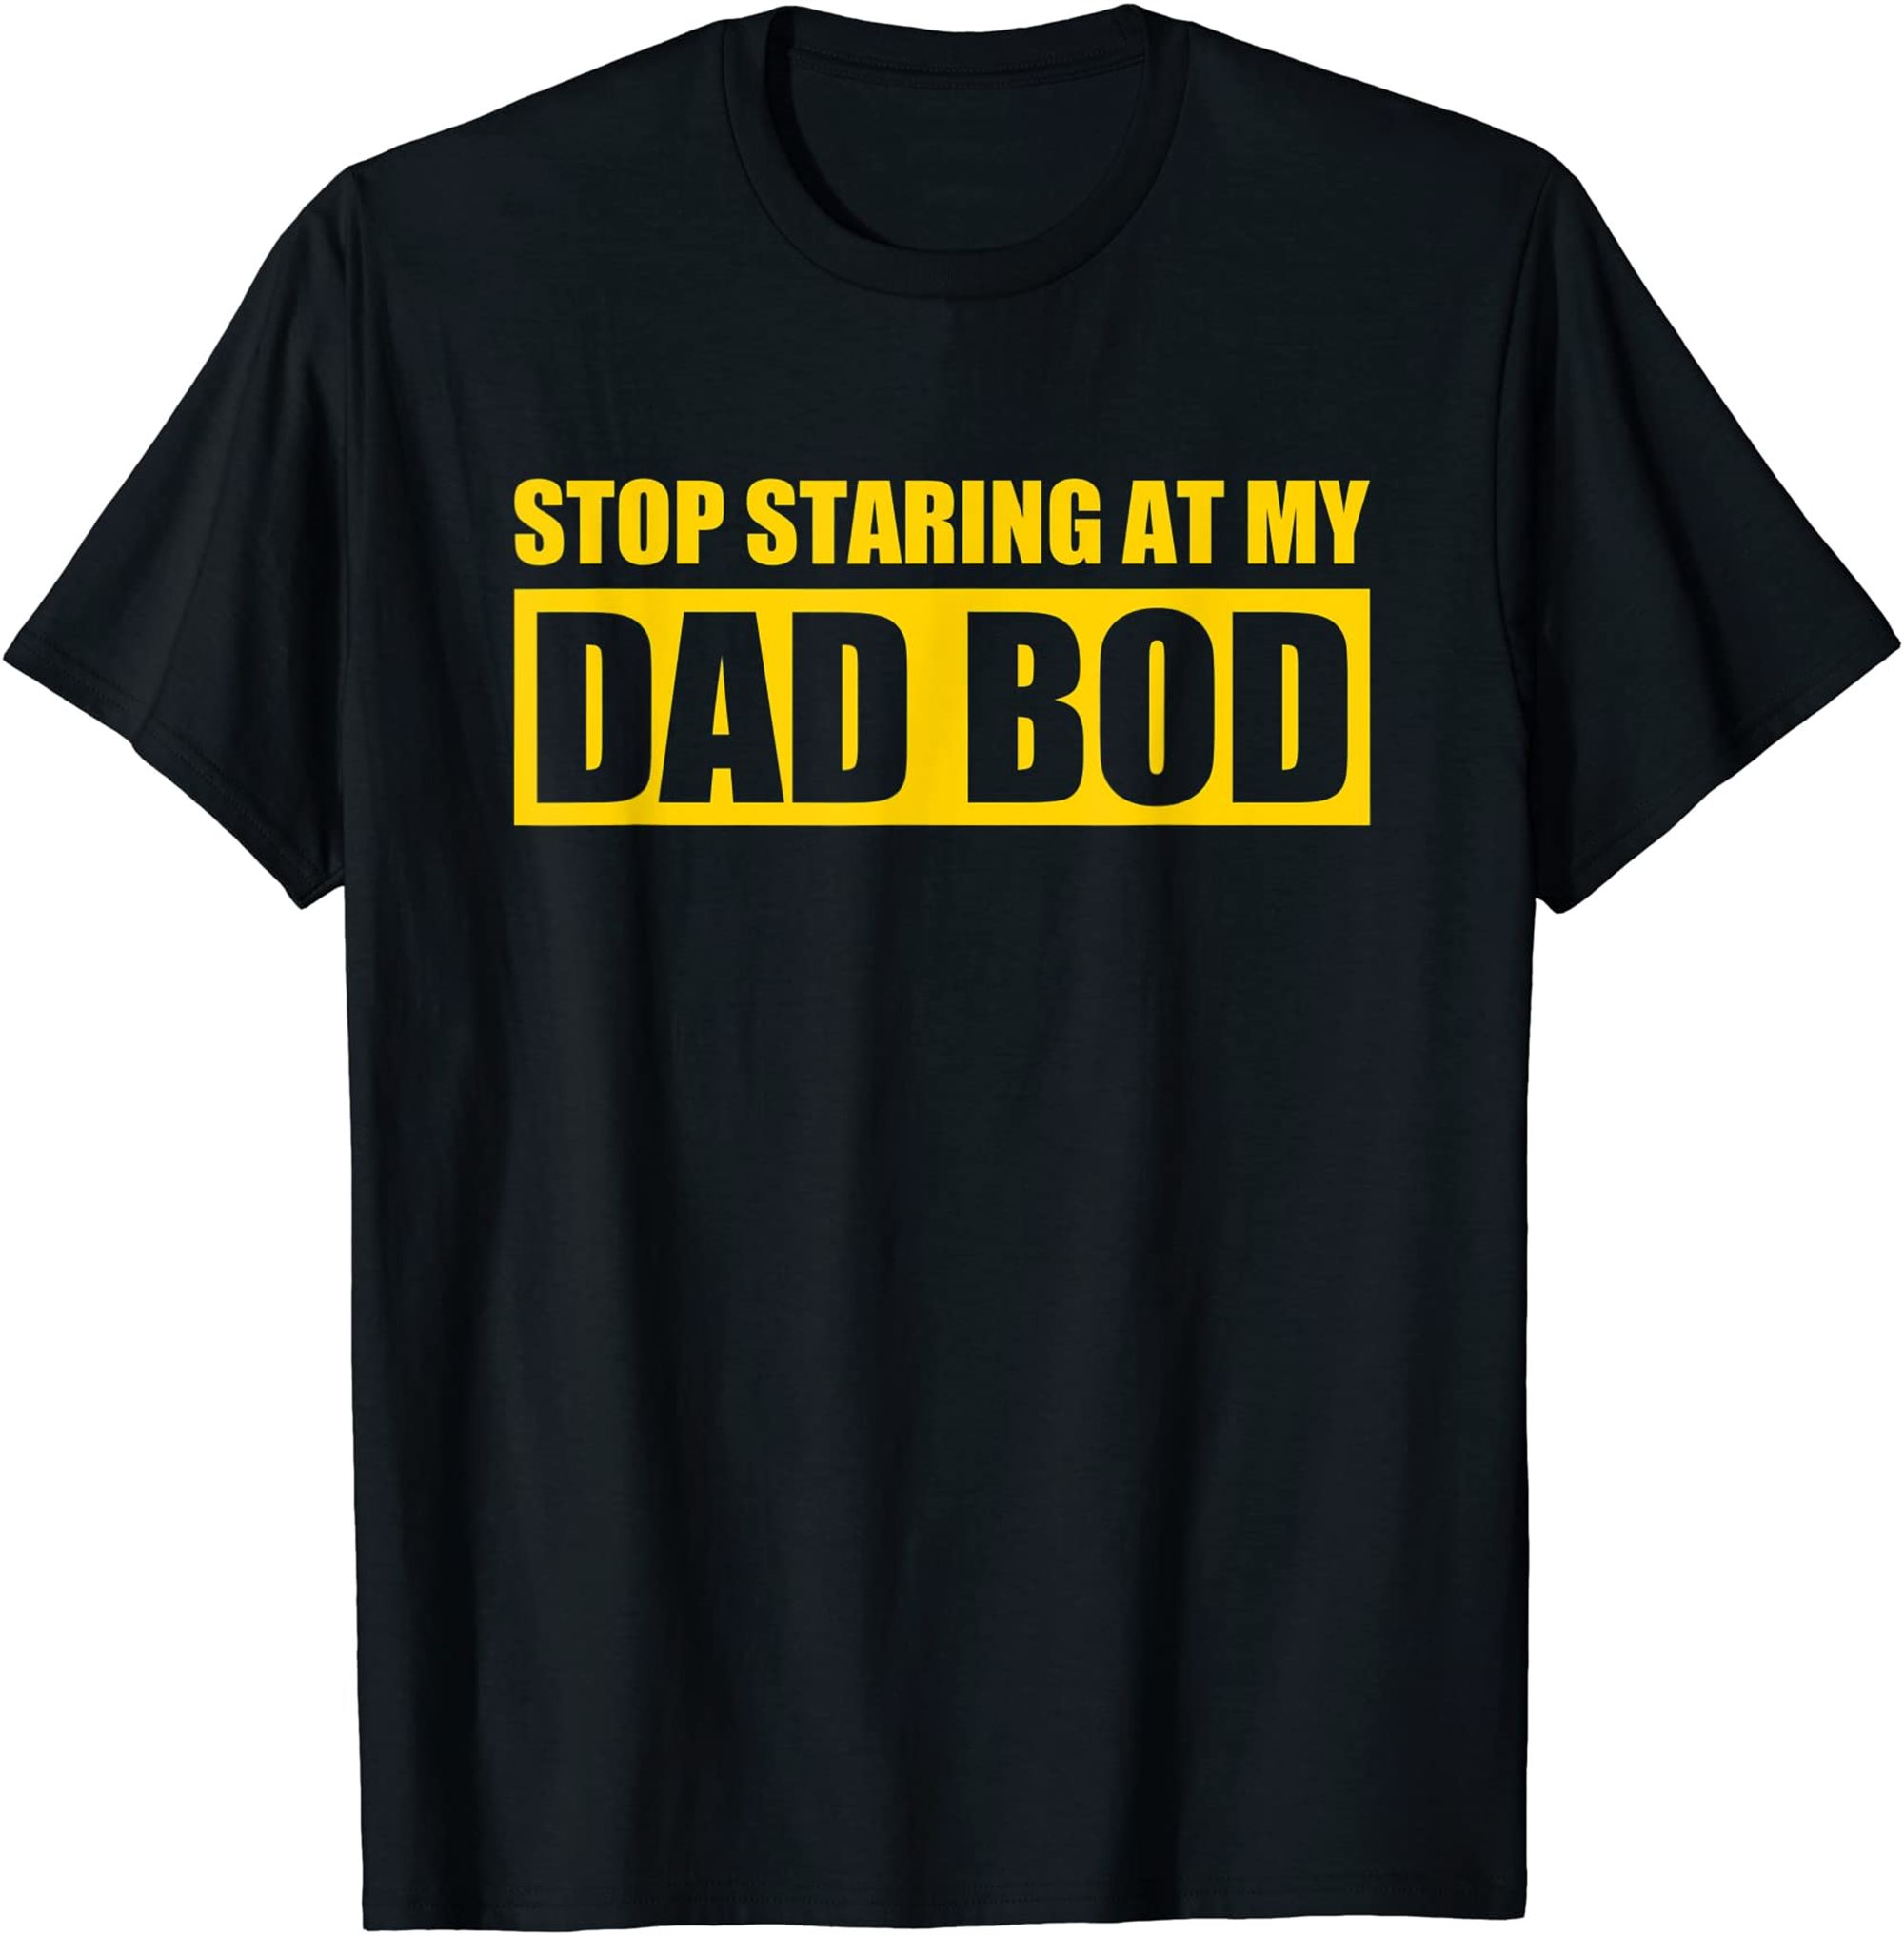 Dad Jokes Shirt Fathers Day Stop Staring At My Dad Bod T-shirt Full Size Up To 5xl